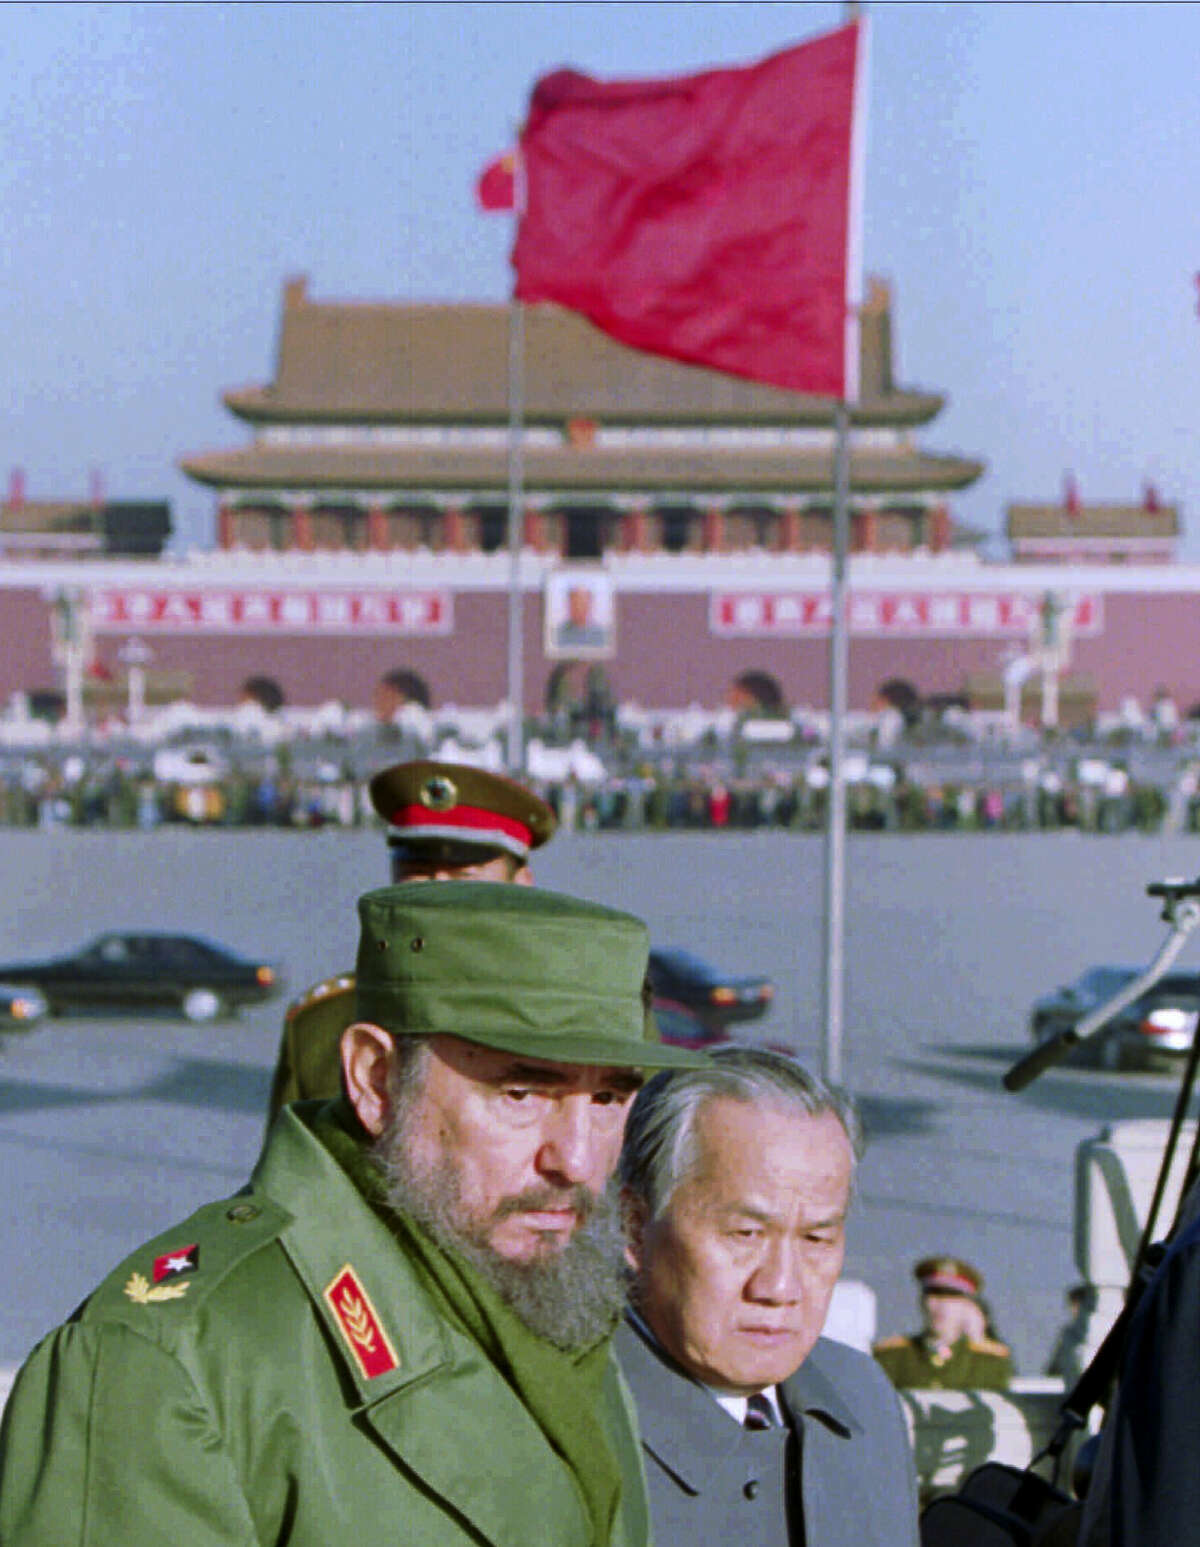 In this Dec. 2, 1995, file photo, Cuban President Fidel Castro tours Beijing’s Tiananmen Square after laying a wreath at the Monument to the People’s Heroes, which commemorates fallen communist revolutionaries. Castro, who led a rebel army to victory in Cuba, embraced Soviet-style communism and defied the power of 10 U.S. presidents during his half century rule, died at age 90 on Friday, Nov 25, 2016. Viewed from the world’Äôs largest communist country, Castro’Äôs death is a reminder of how the communist axis has changed beyond recognition since the ideologically charged era when the bearded revolutionary cut a dashing figure on the world stage alongside leaders like Mao Zedong.